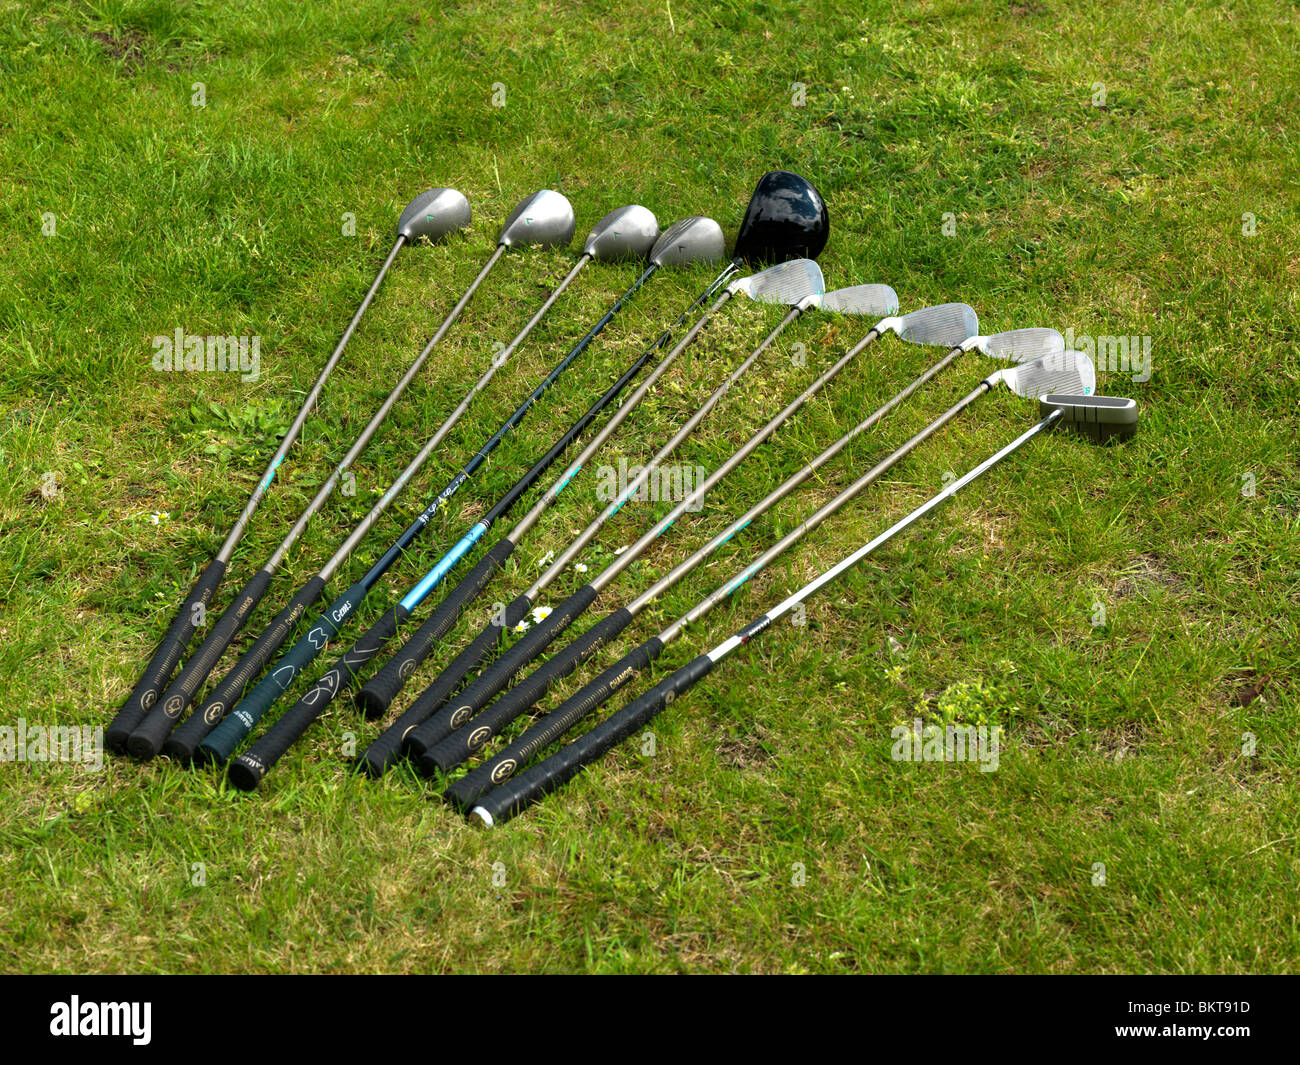 A full set of Golf Clubs Stock Photo